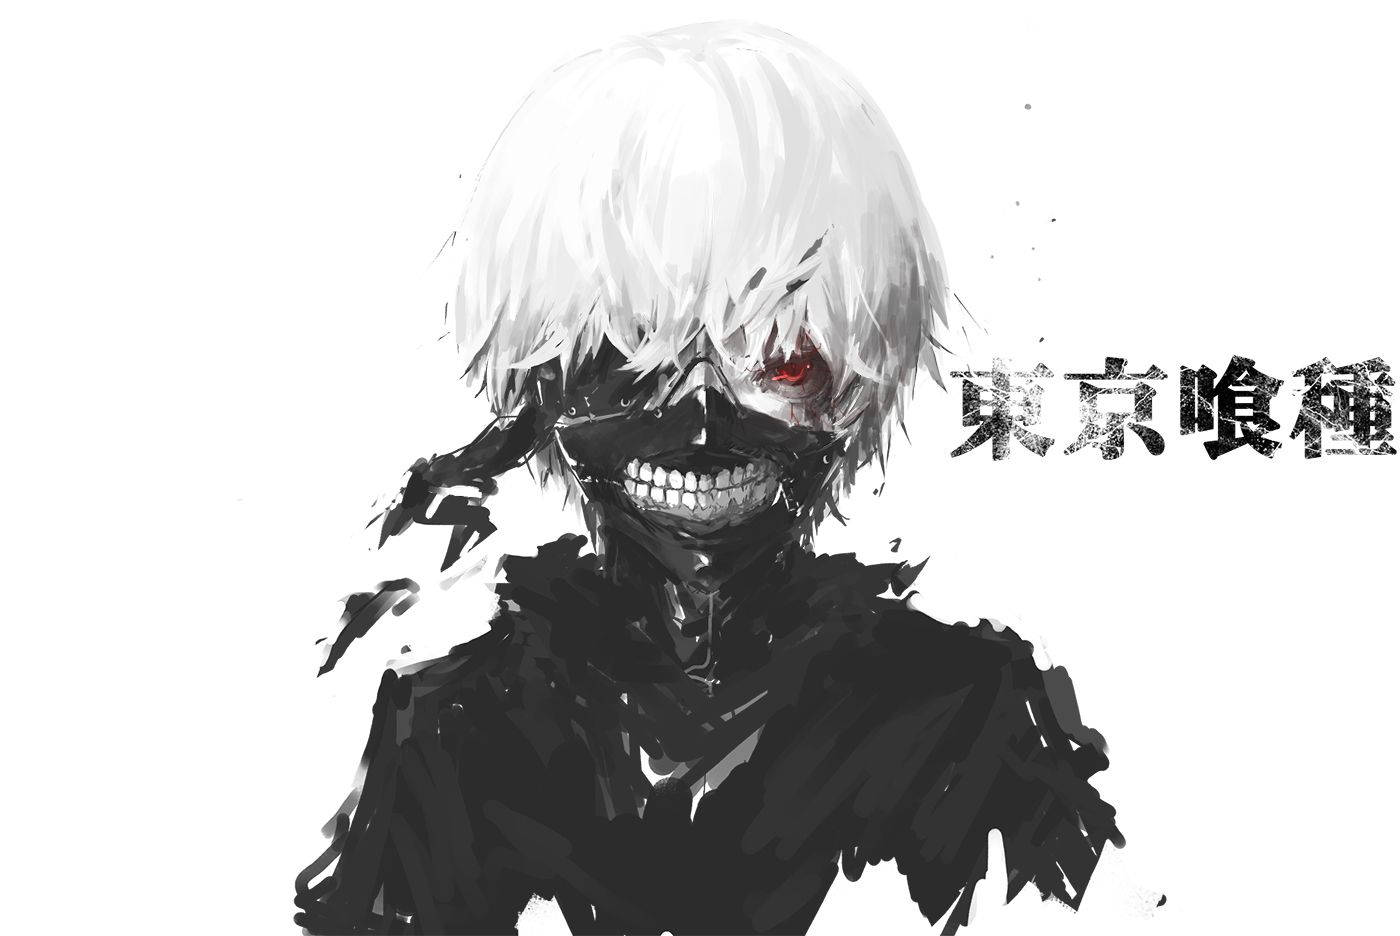 Ken Kaneki searches for his true identity in Tokyo Ghoul Wallpaper